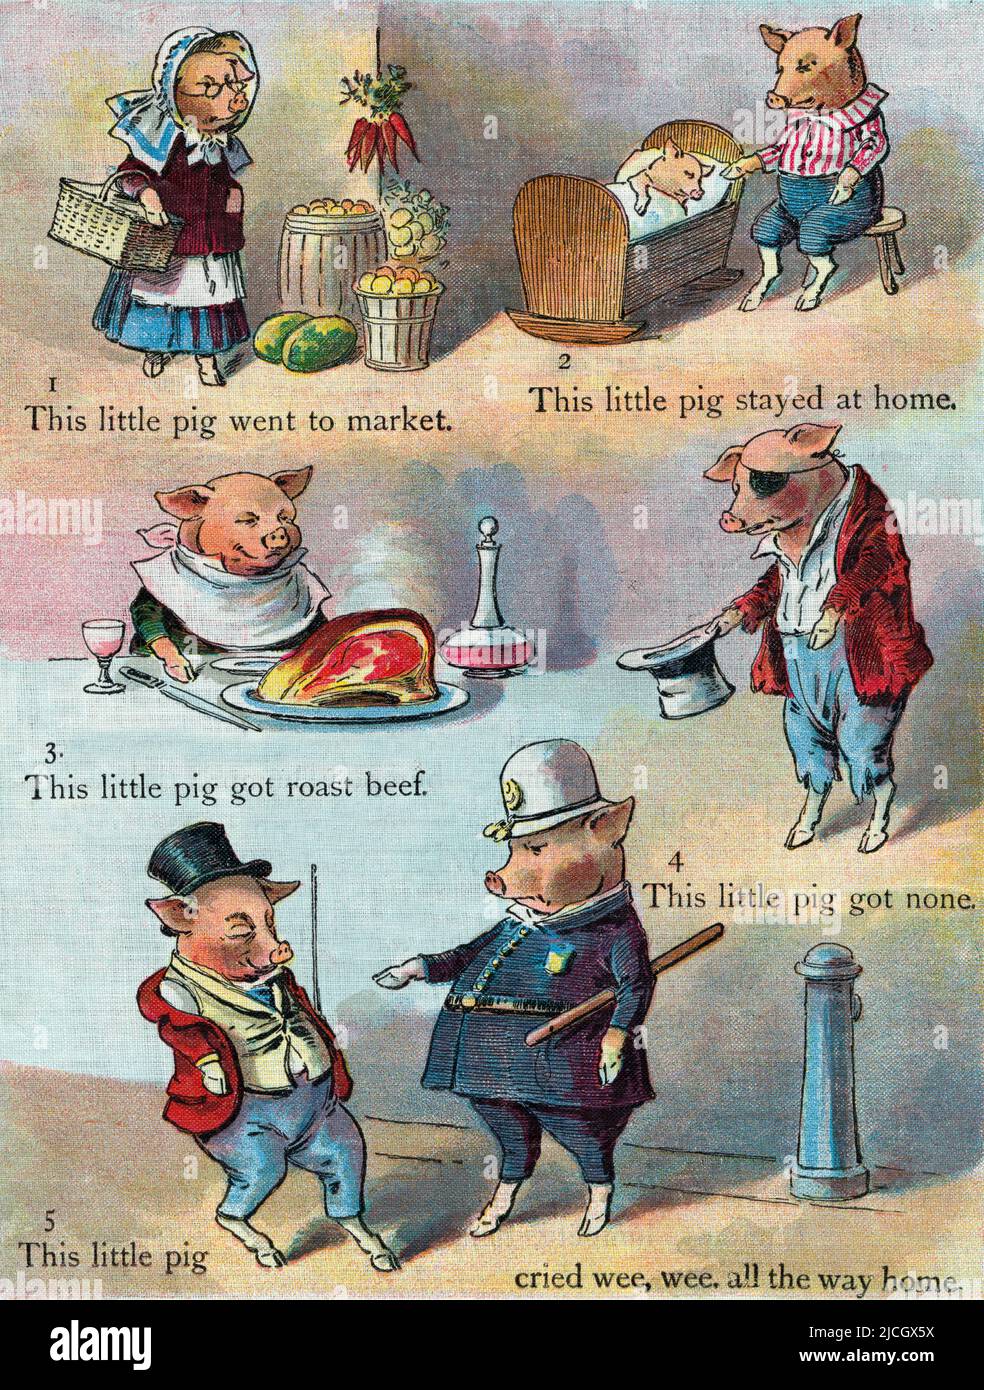 This little pig went to market.  After a work by an unidentified artist in a 19th century children's nursery rhyme book.  This little pig stayed at home...... Stock Photo